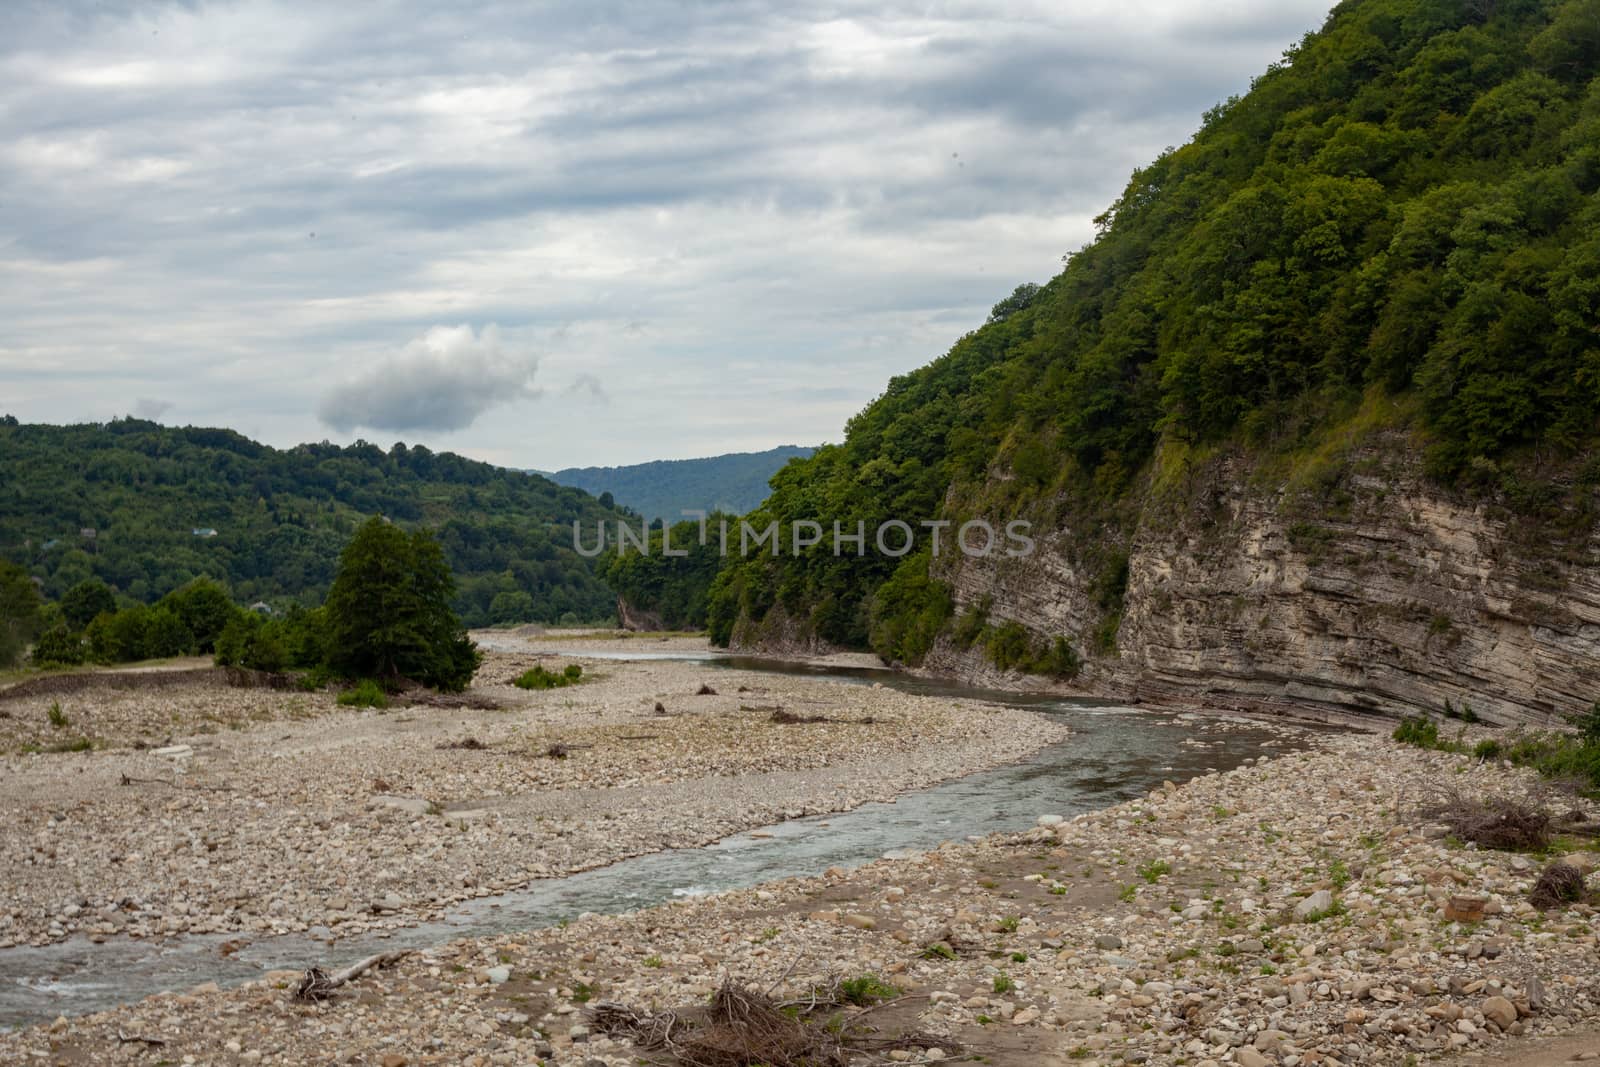 Cloudy summer landscape with a stone bed of the Ashe river